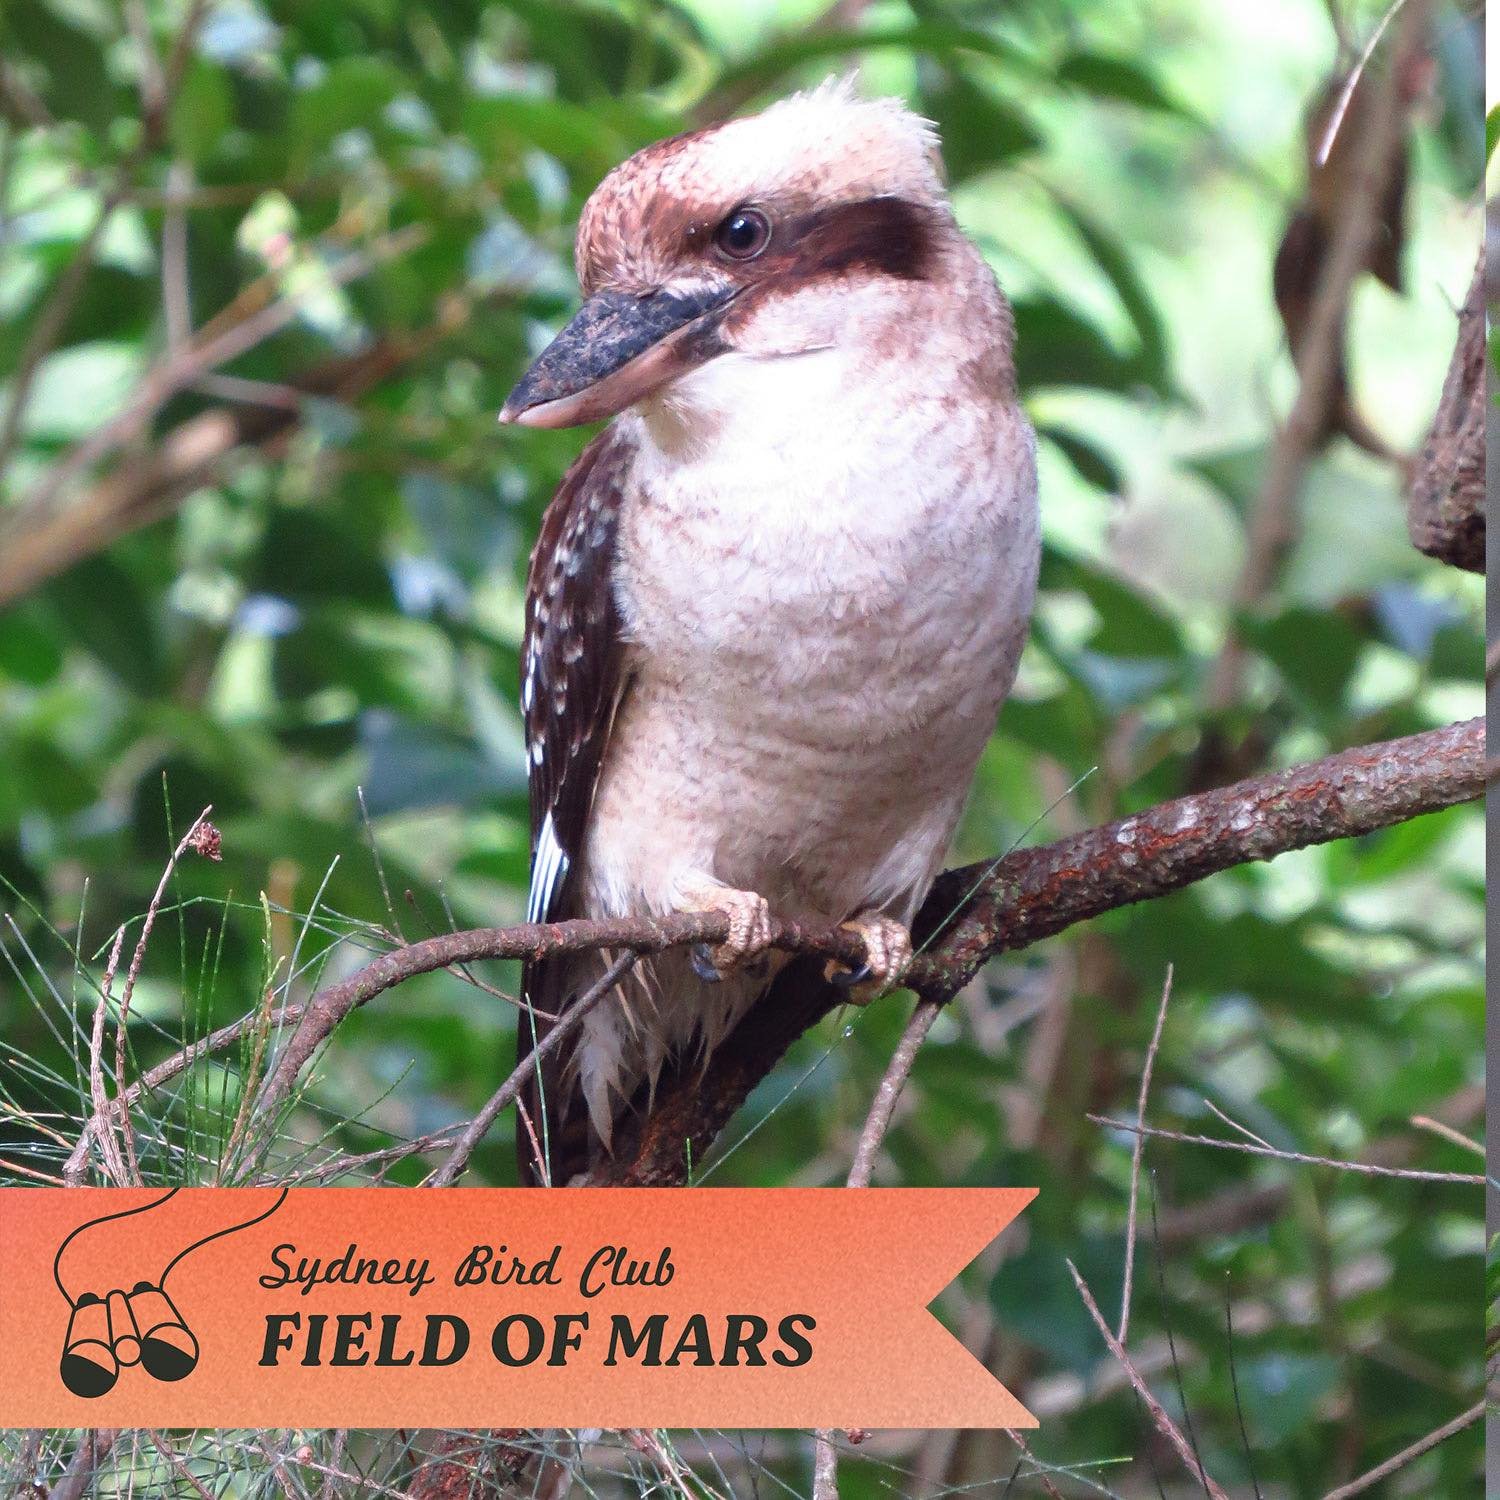 Our last Field of Mars highlighted bird before the walk tomorrow! This one&rsquo;s a guaranteed sighting as the reserve has so many Laughing Kookaburras perched beautifully or grabbing a worm or two from the ground in plain sight 🐛 

This icon of Au